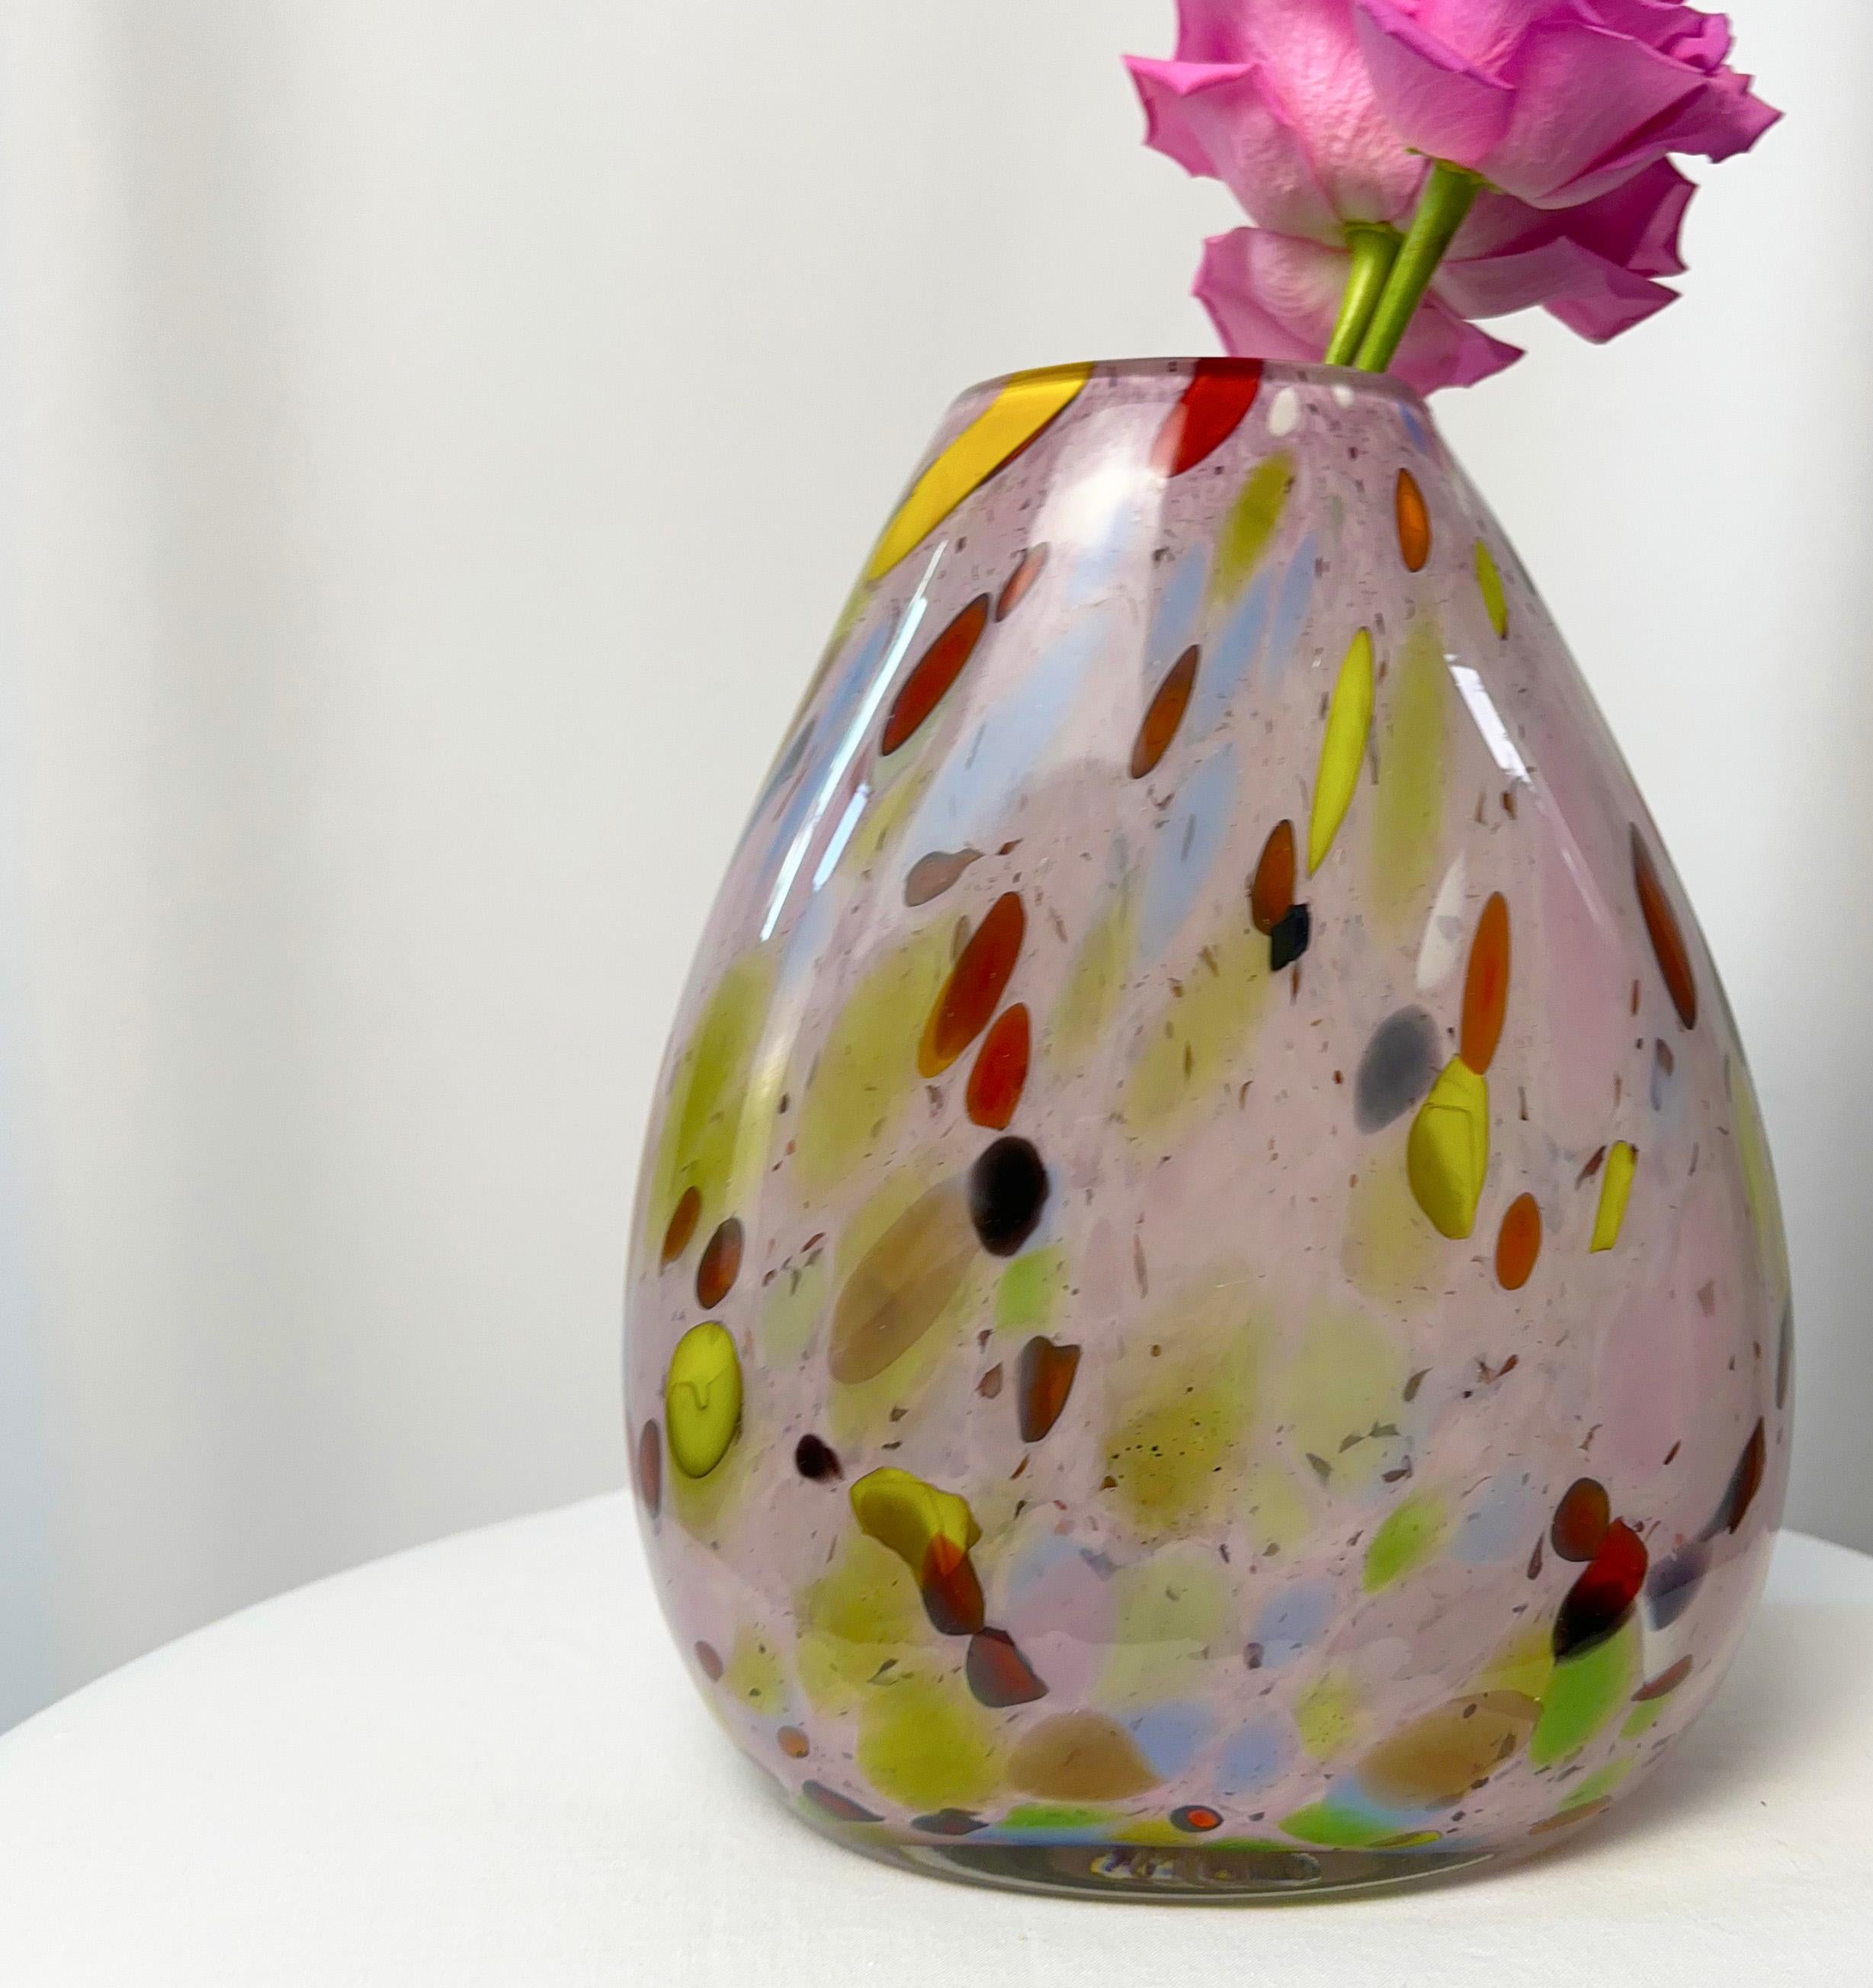 This luminous Murano teardrop vase, dappled with a confetti of colors, captures the vivacious spirit of the 1970s disco era. A testament to the revered glassmaking tradition of Murano, Italy, this piece, although from an unknown maker, is an